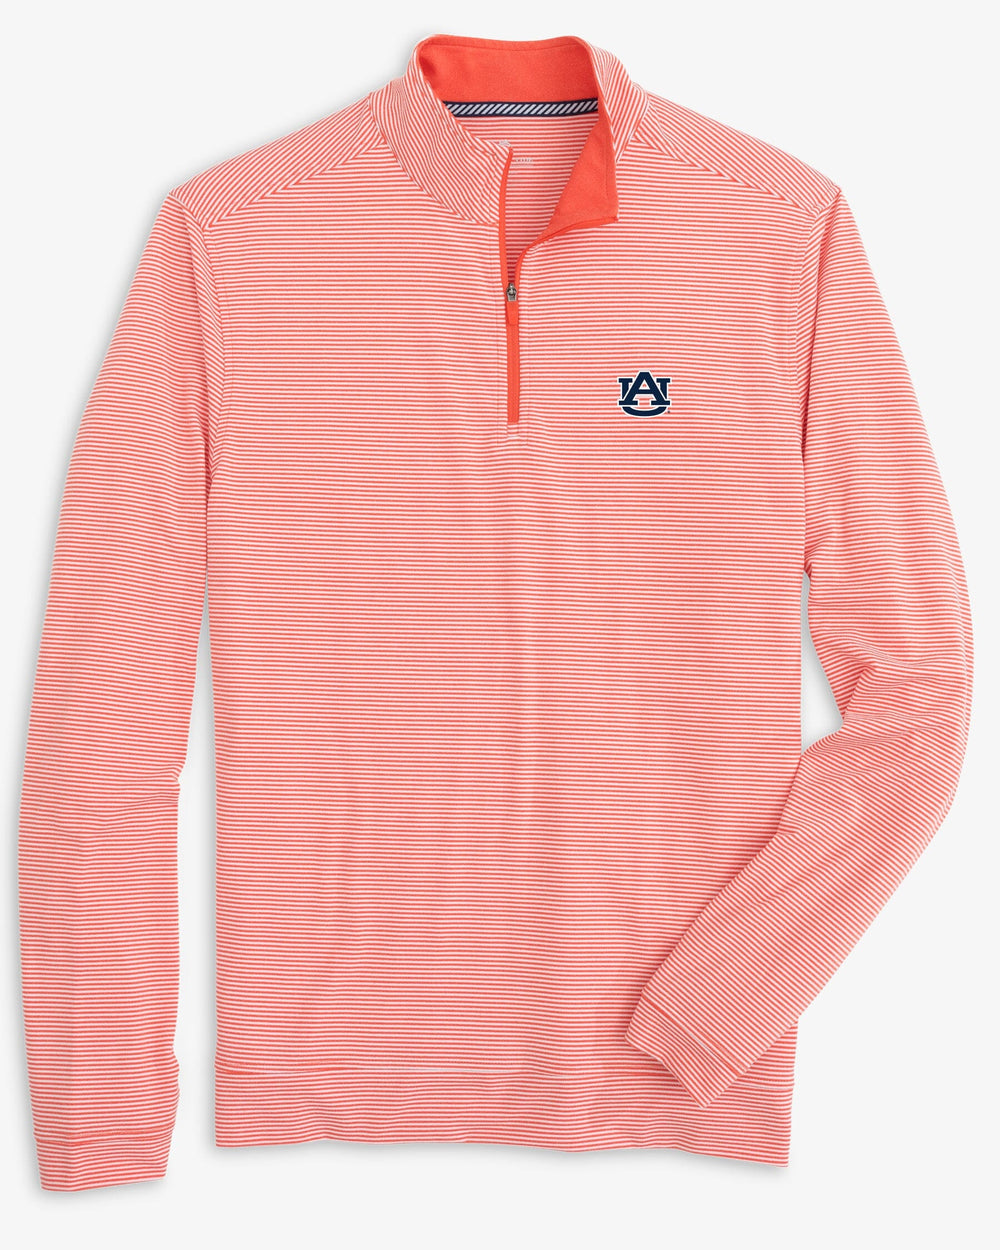 The front view of the Auburn Tigers Cruiser Micro-Stripe Heather Quarter Zip by Southern Tide - Heather Endzone Orange